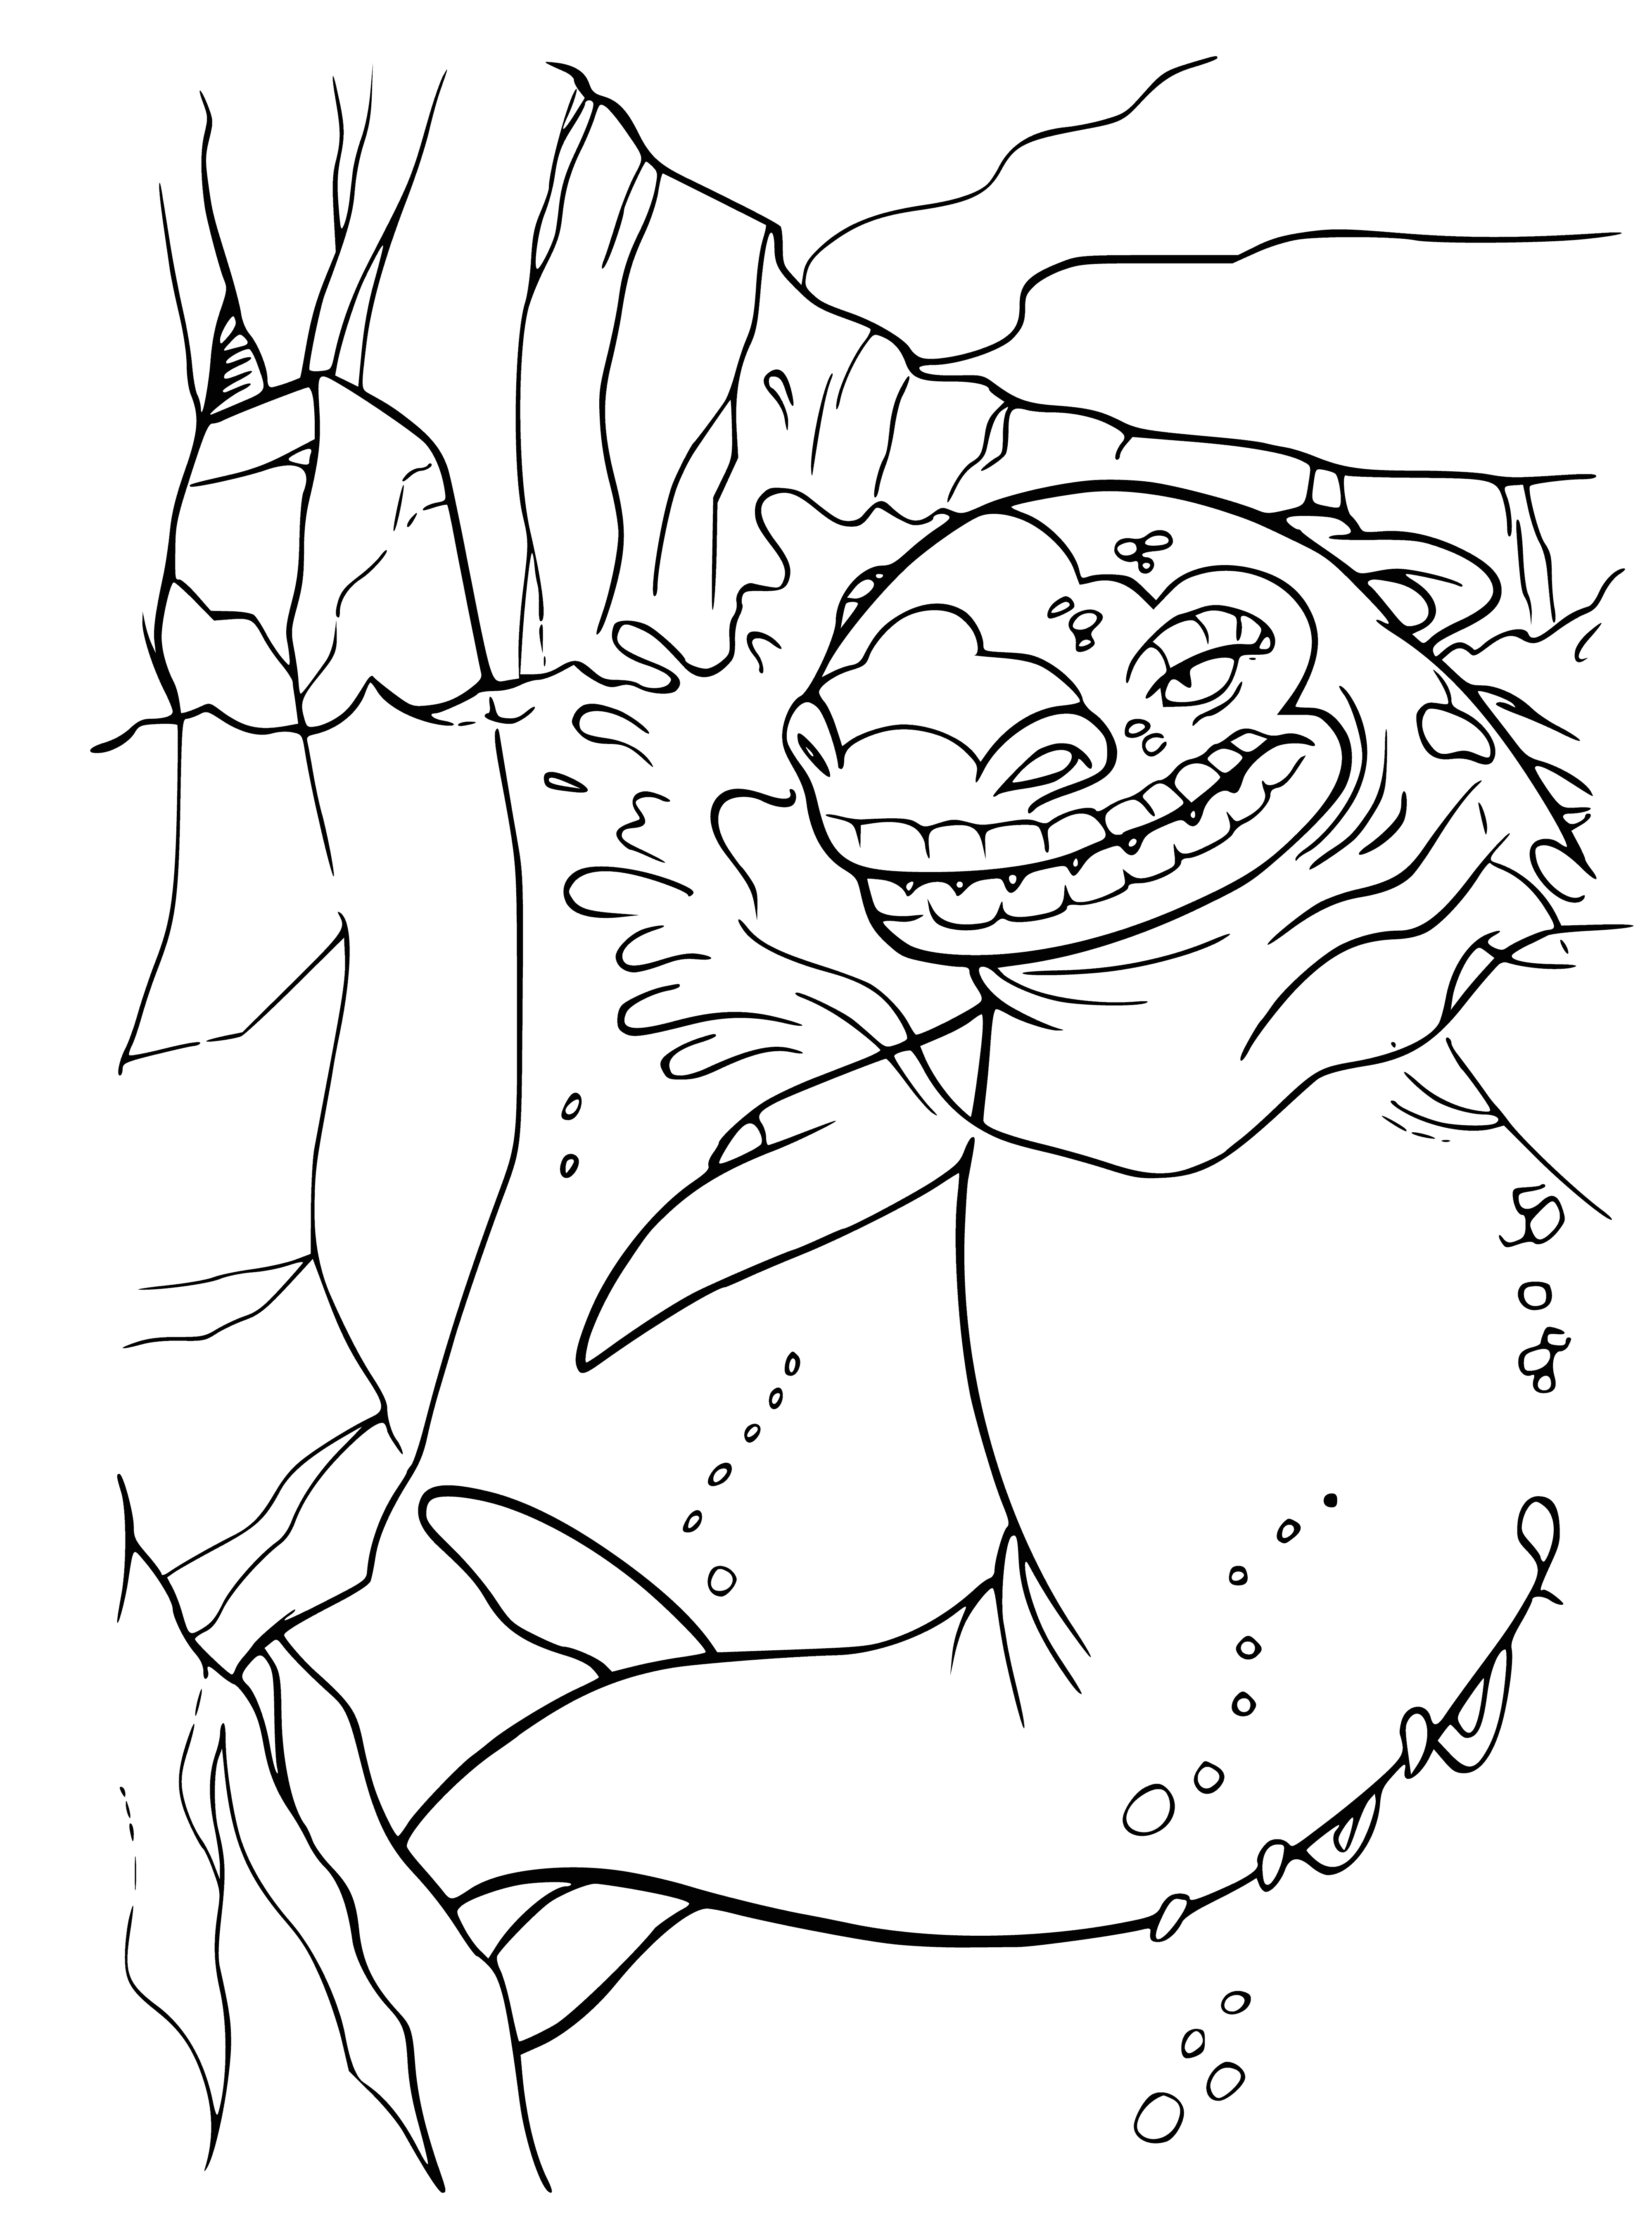 coloring page: Gigantic predatory reptile frozen in ice with sharp claws, long neck and sharp teeth, covered in scales and cold eyes.